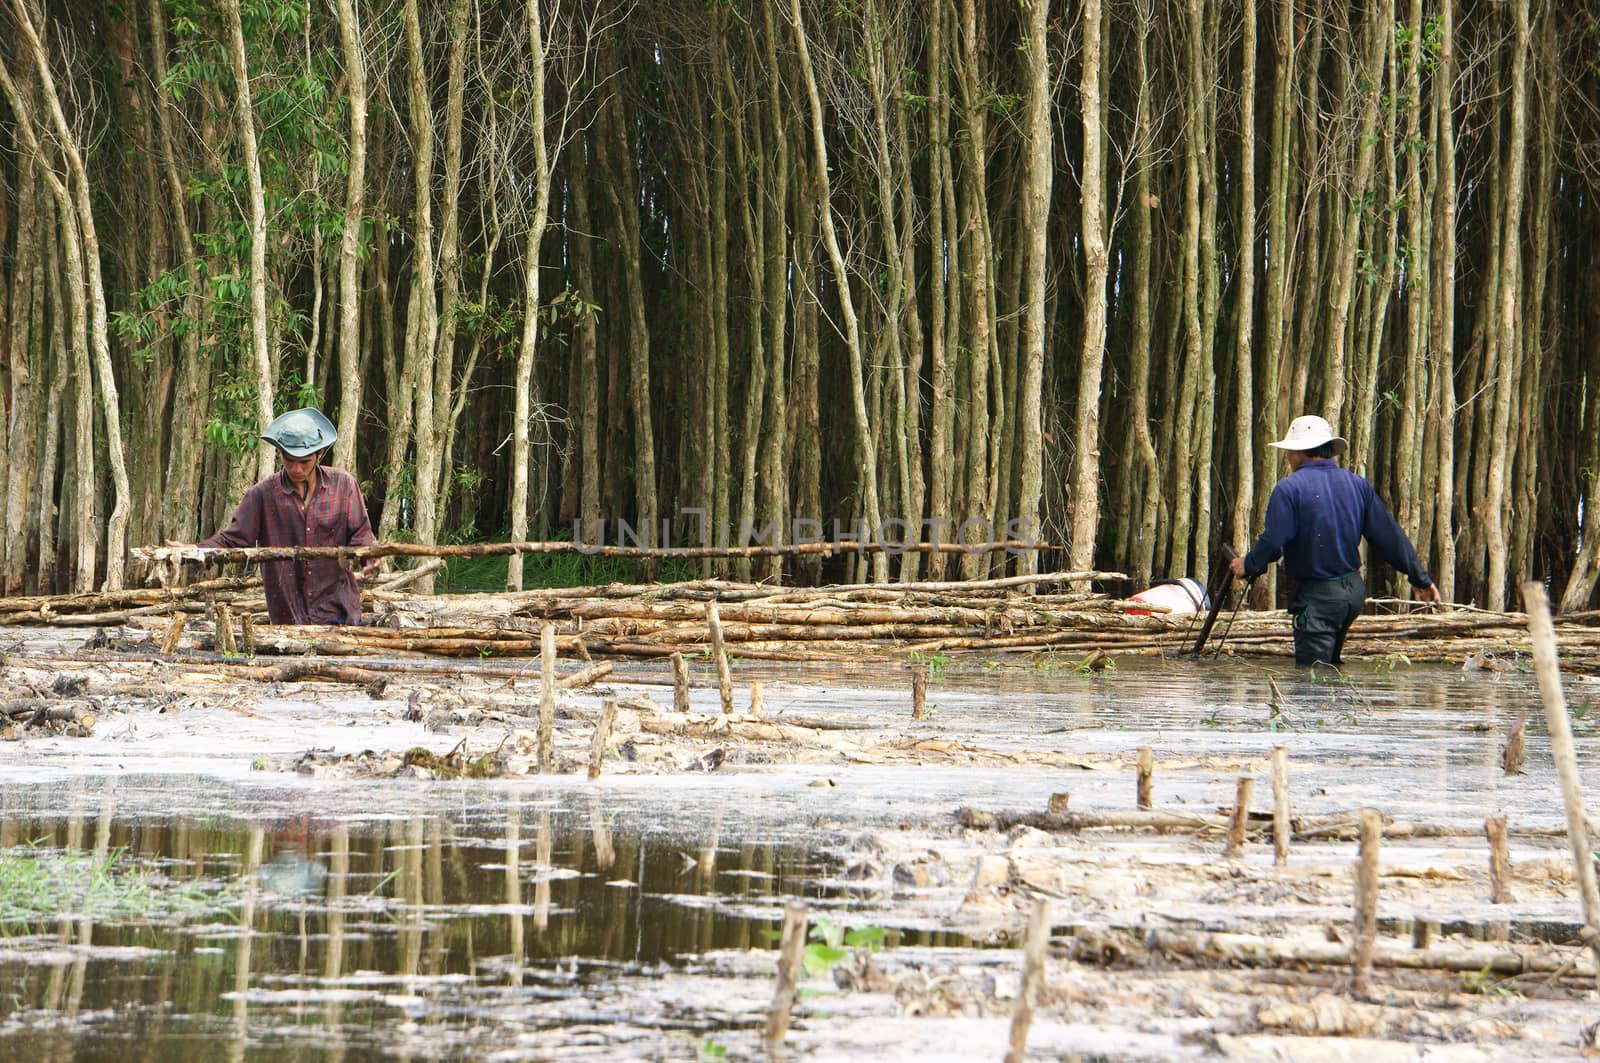 LONG AN, VIET NAM- NOVEMBER 11: People harvest indingo tree at flooled indigo forest by saw in Viet Nam on November 11, 2013